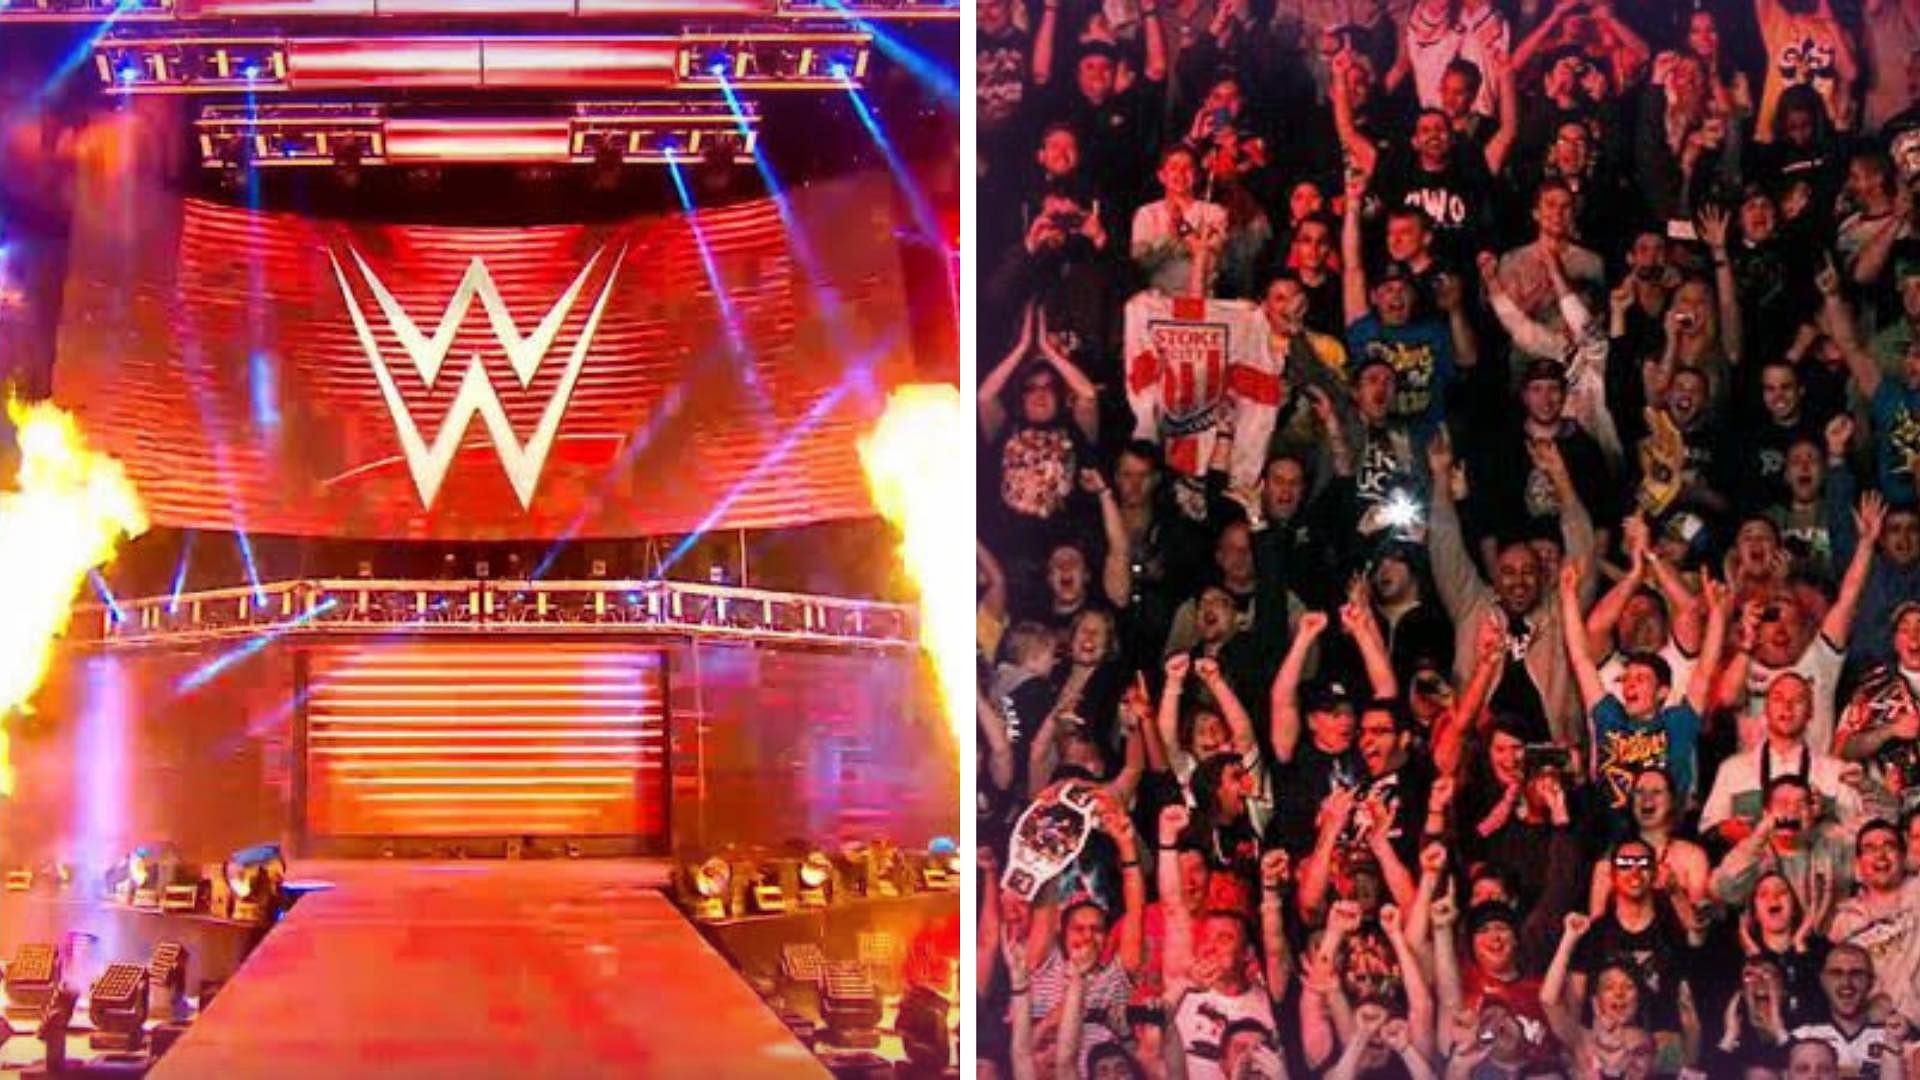 WWE is one of the biggest Wrestling promotion